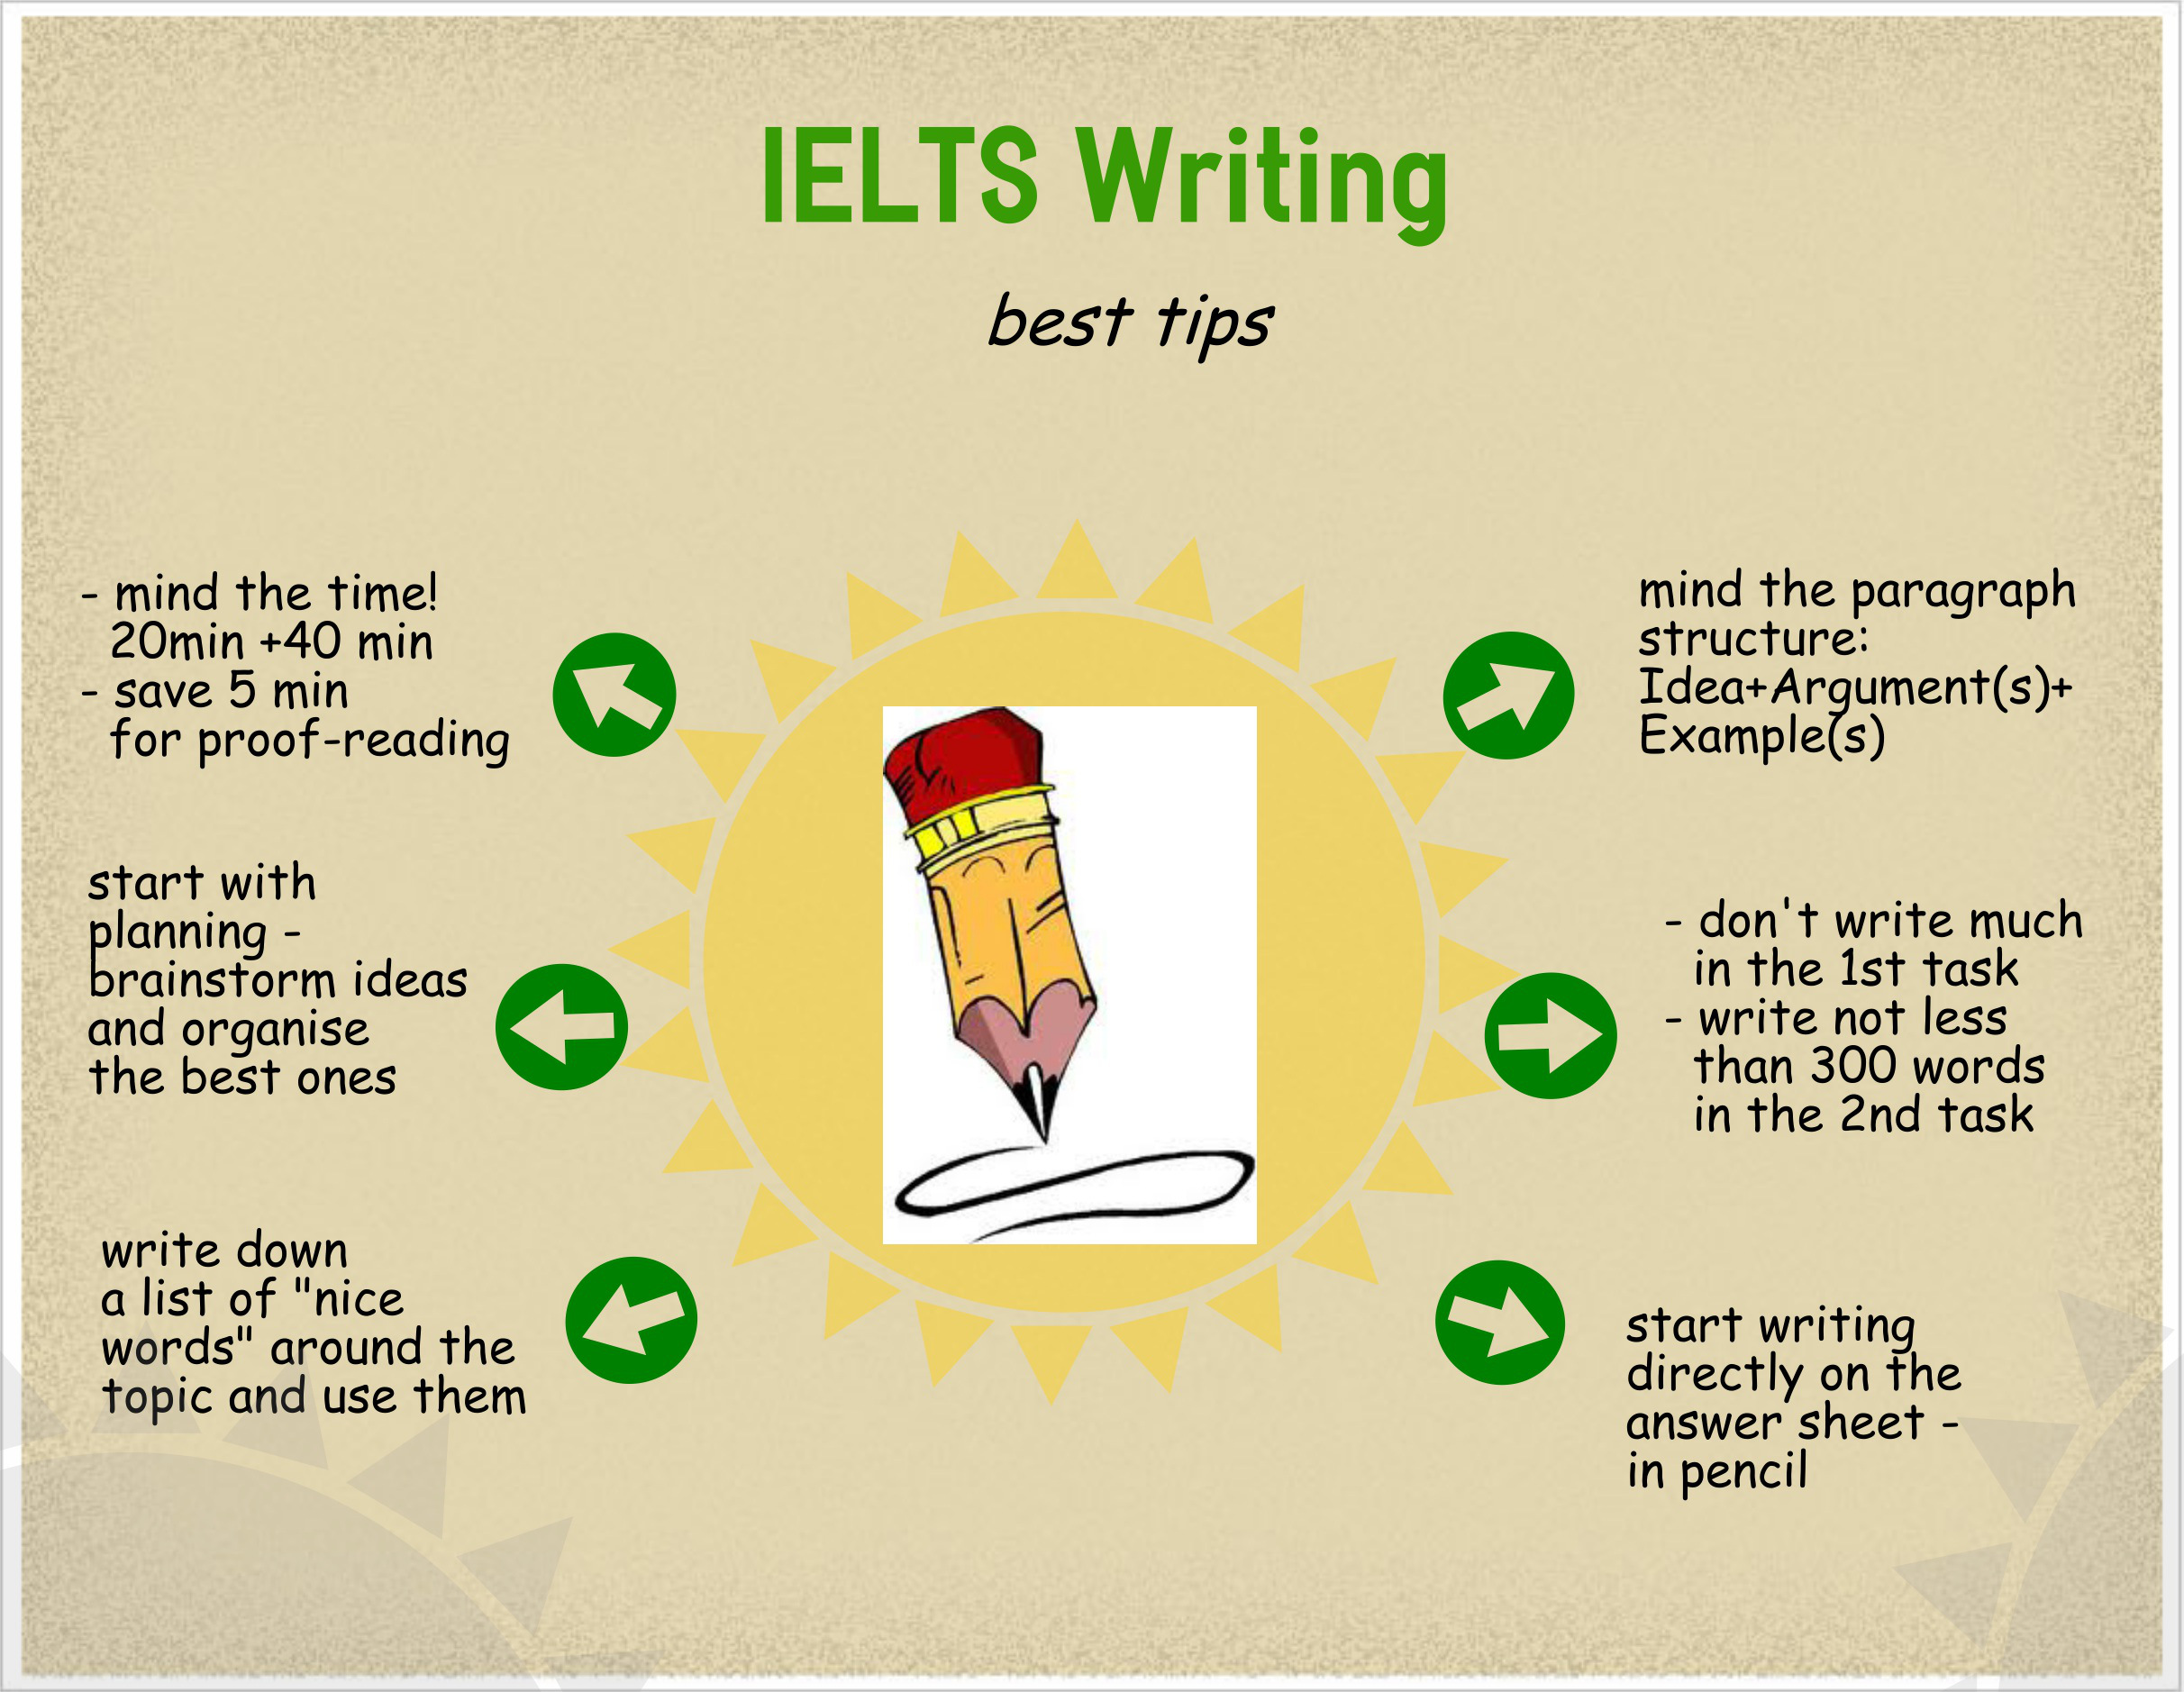 Writing tips to IELTS